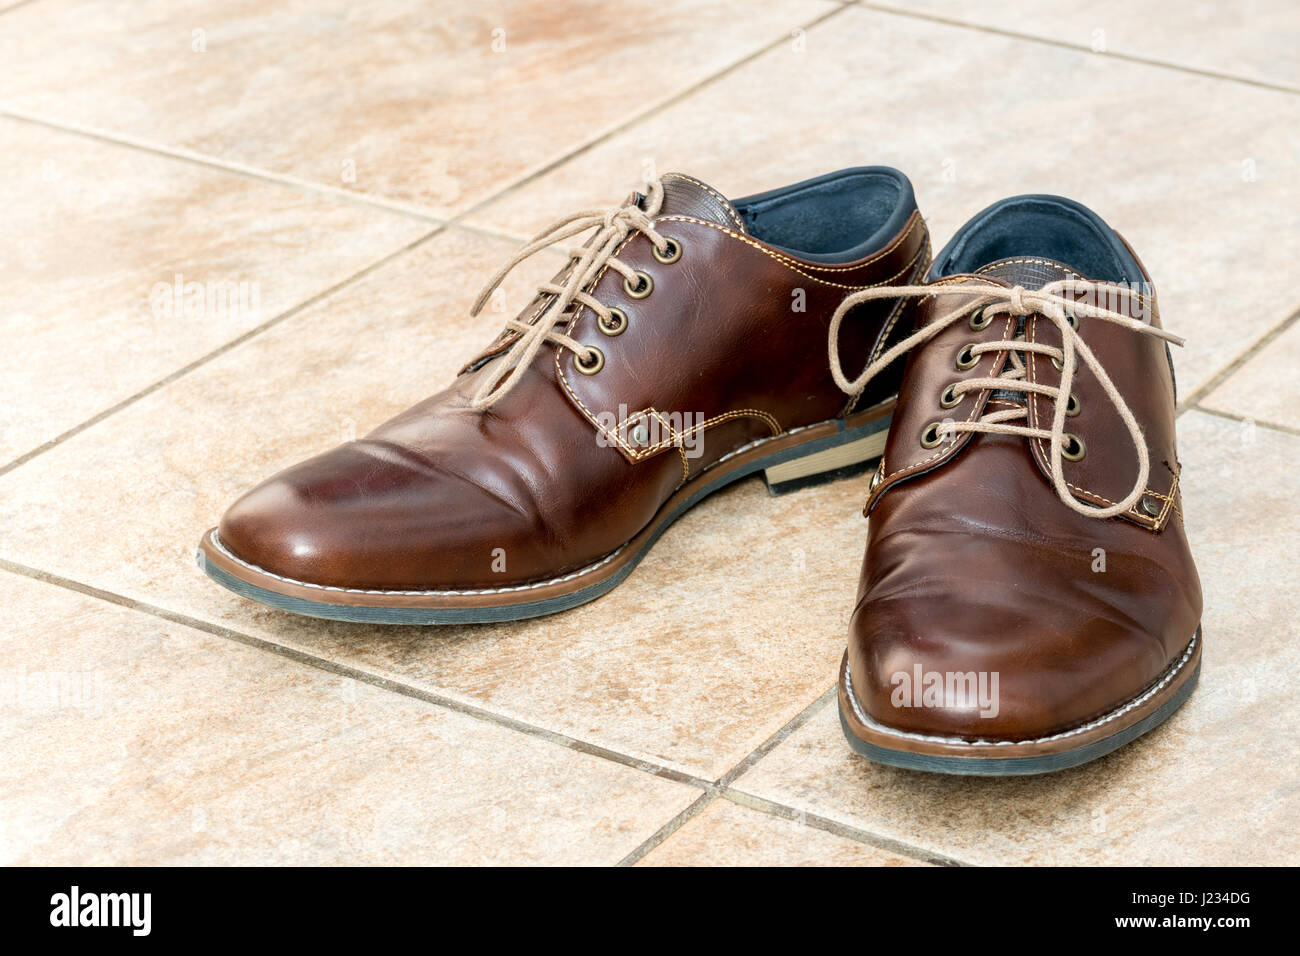 Fashion brown leather men's shoes on a light brown ceramic tiles Stock Photo